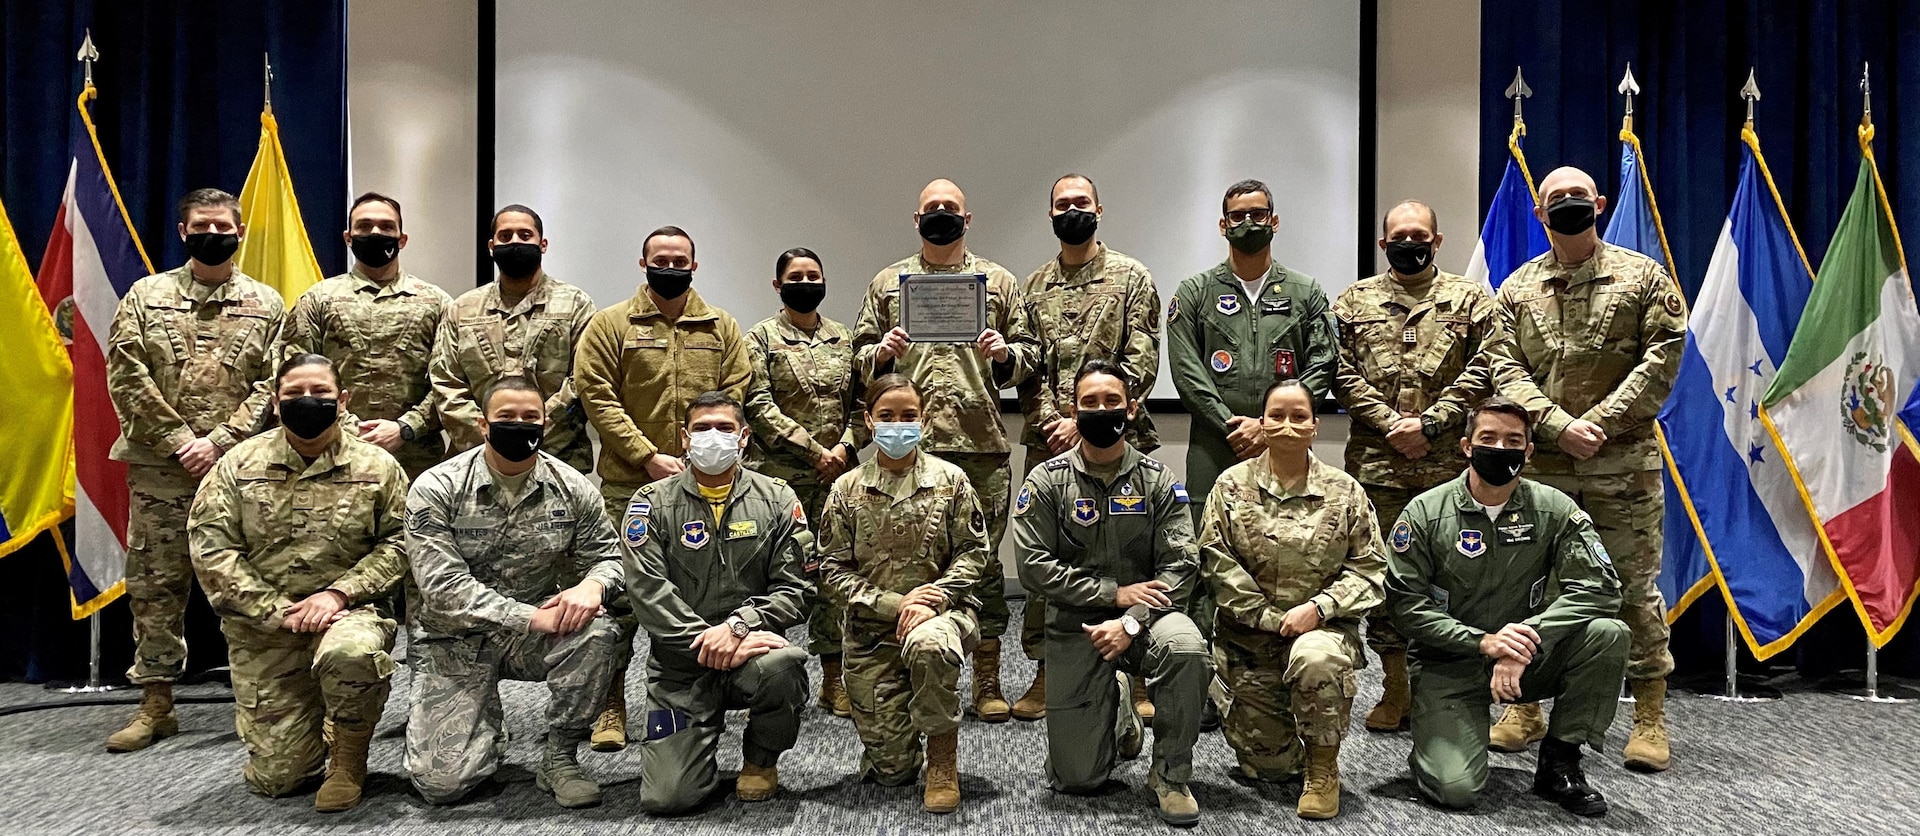 The Inter-American Air Forces Academy at Joint Base San Antonio-Lackland was formally presented with the United States Air Force's 2019 Air Force Enlisted Professional Military Education Program, Outstanding EPME Center of the Year Award Dec. 4.